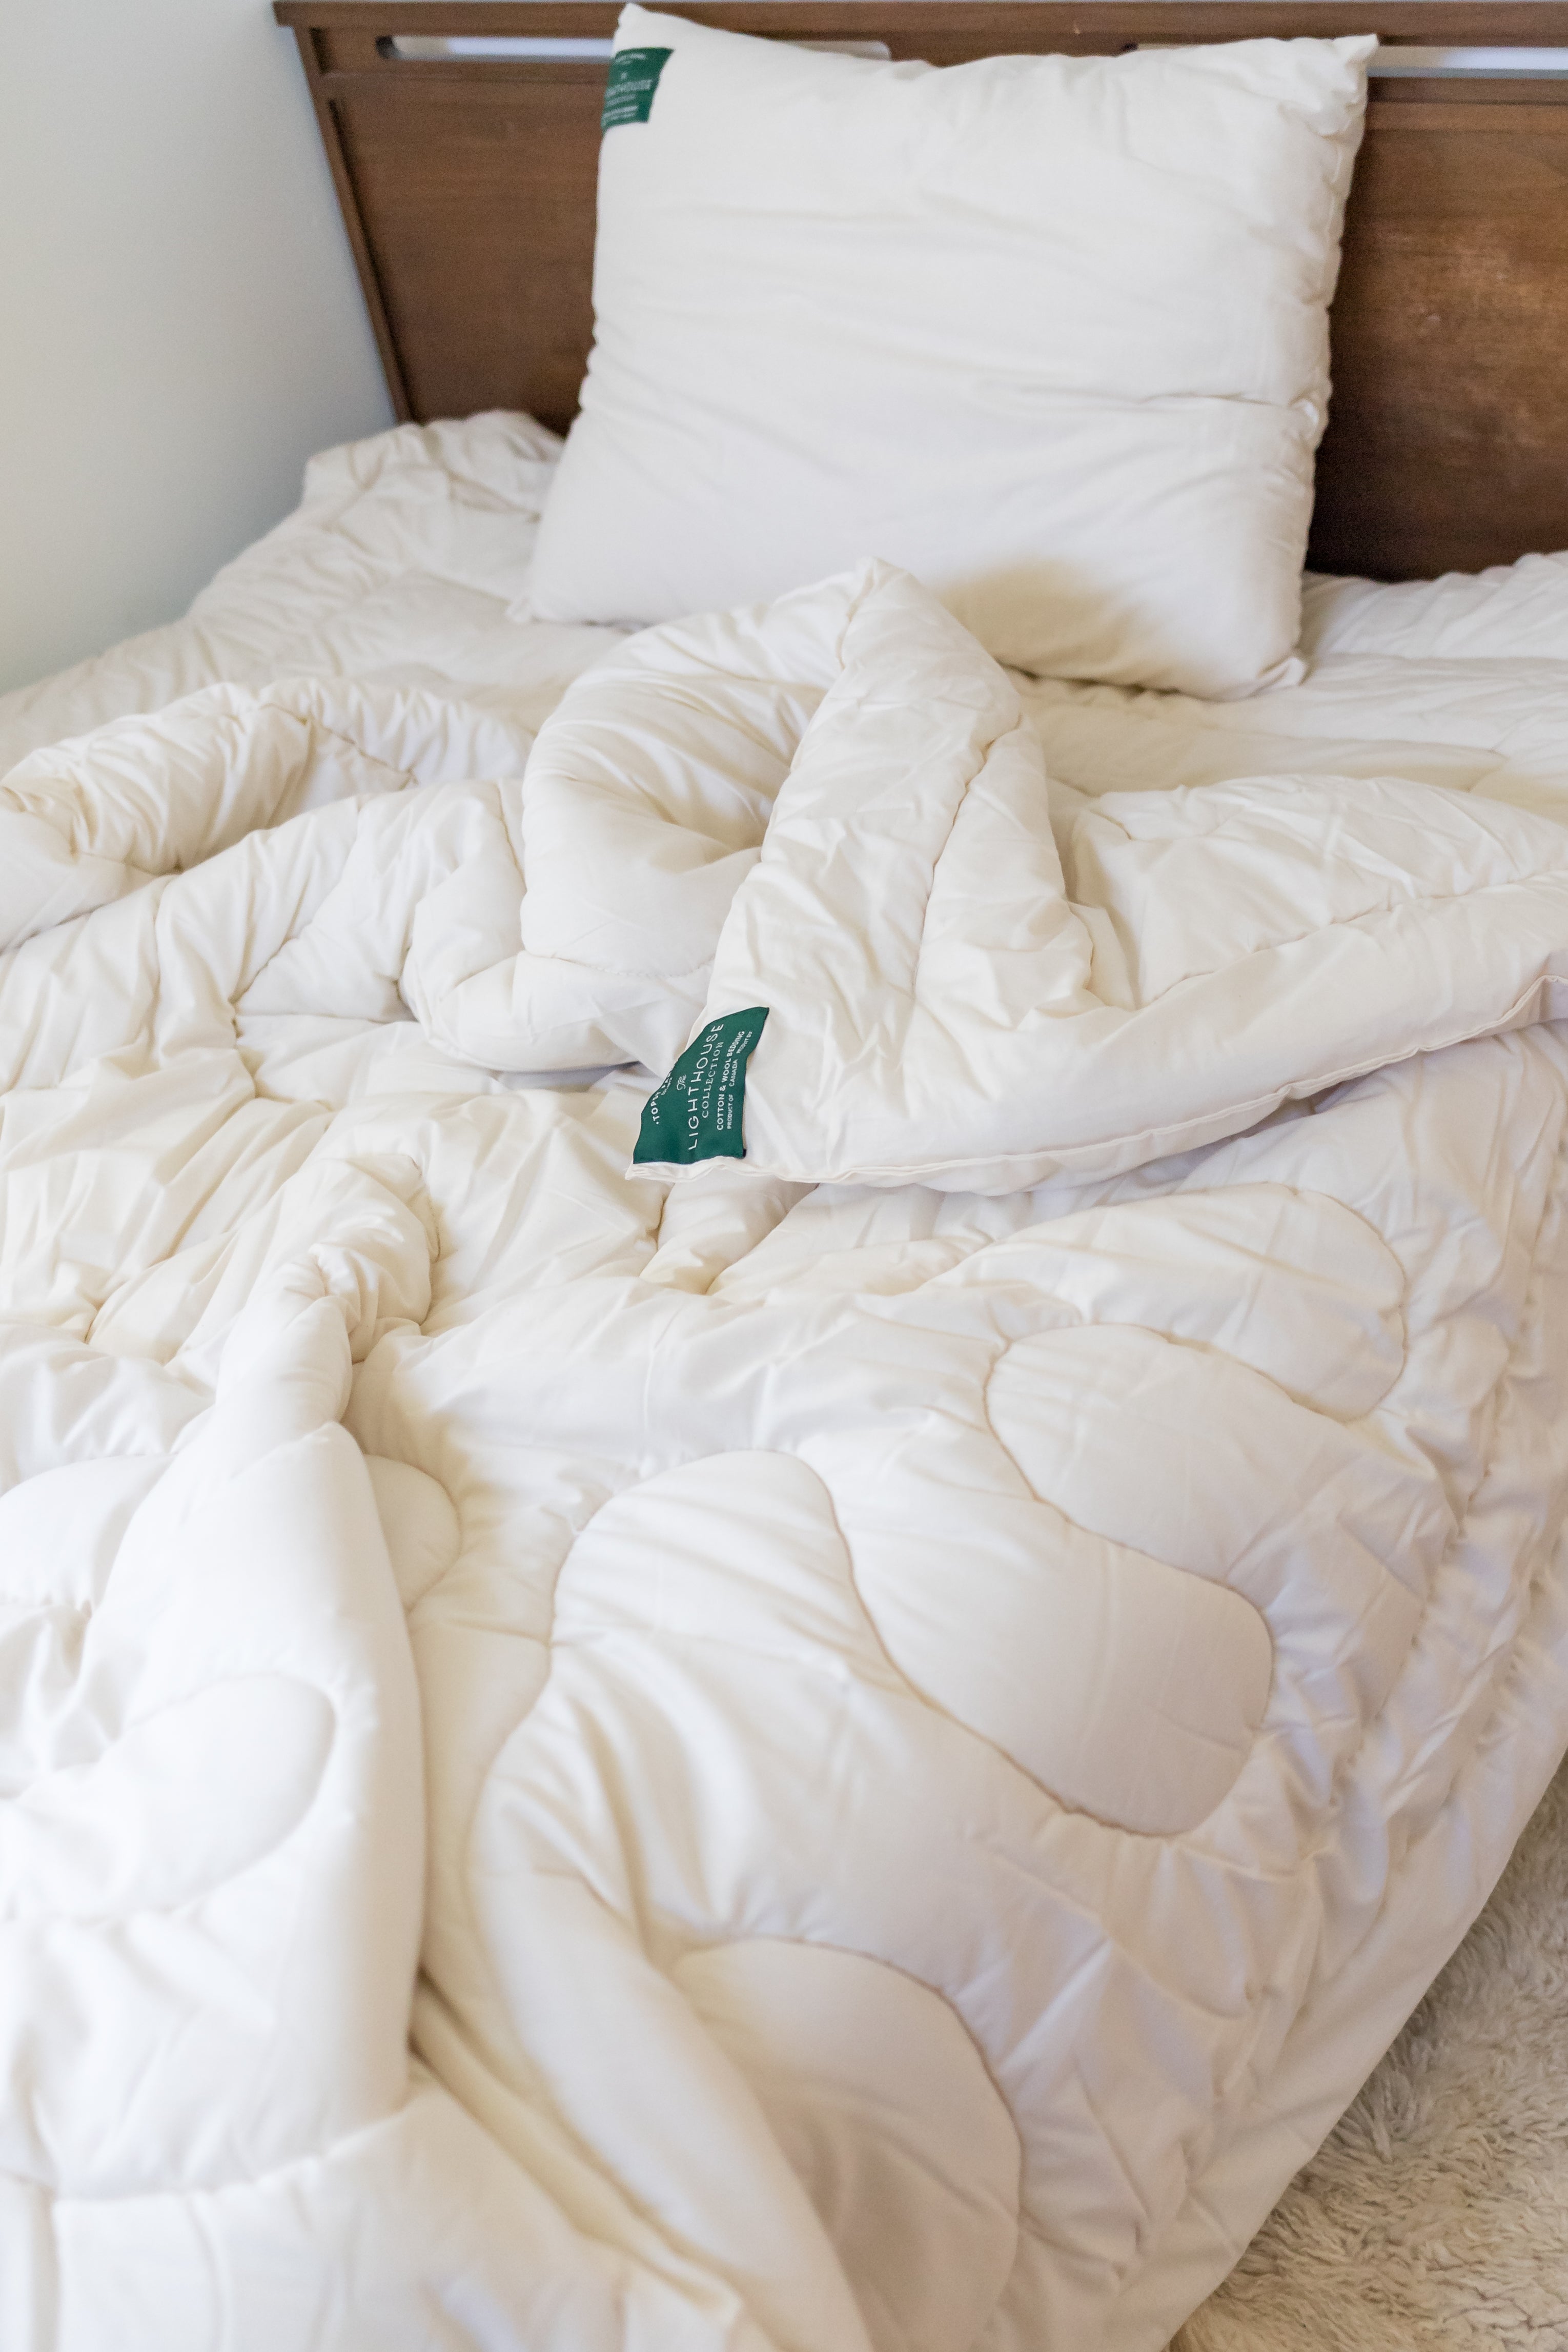 Topsy Farms' wool filled pillows and duvet on a brown bed, with a turquoise wool blanket on top